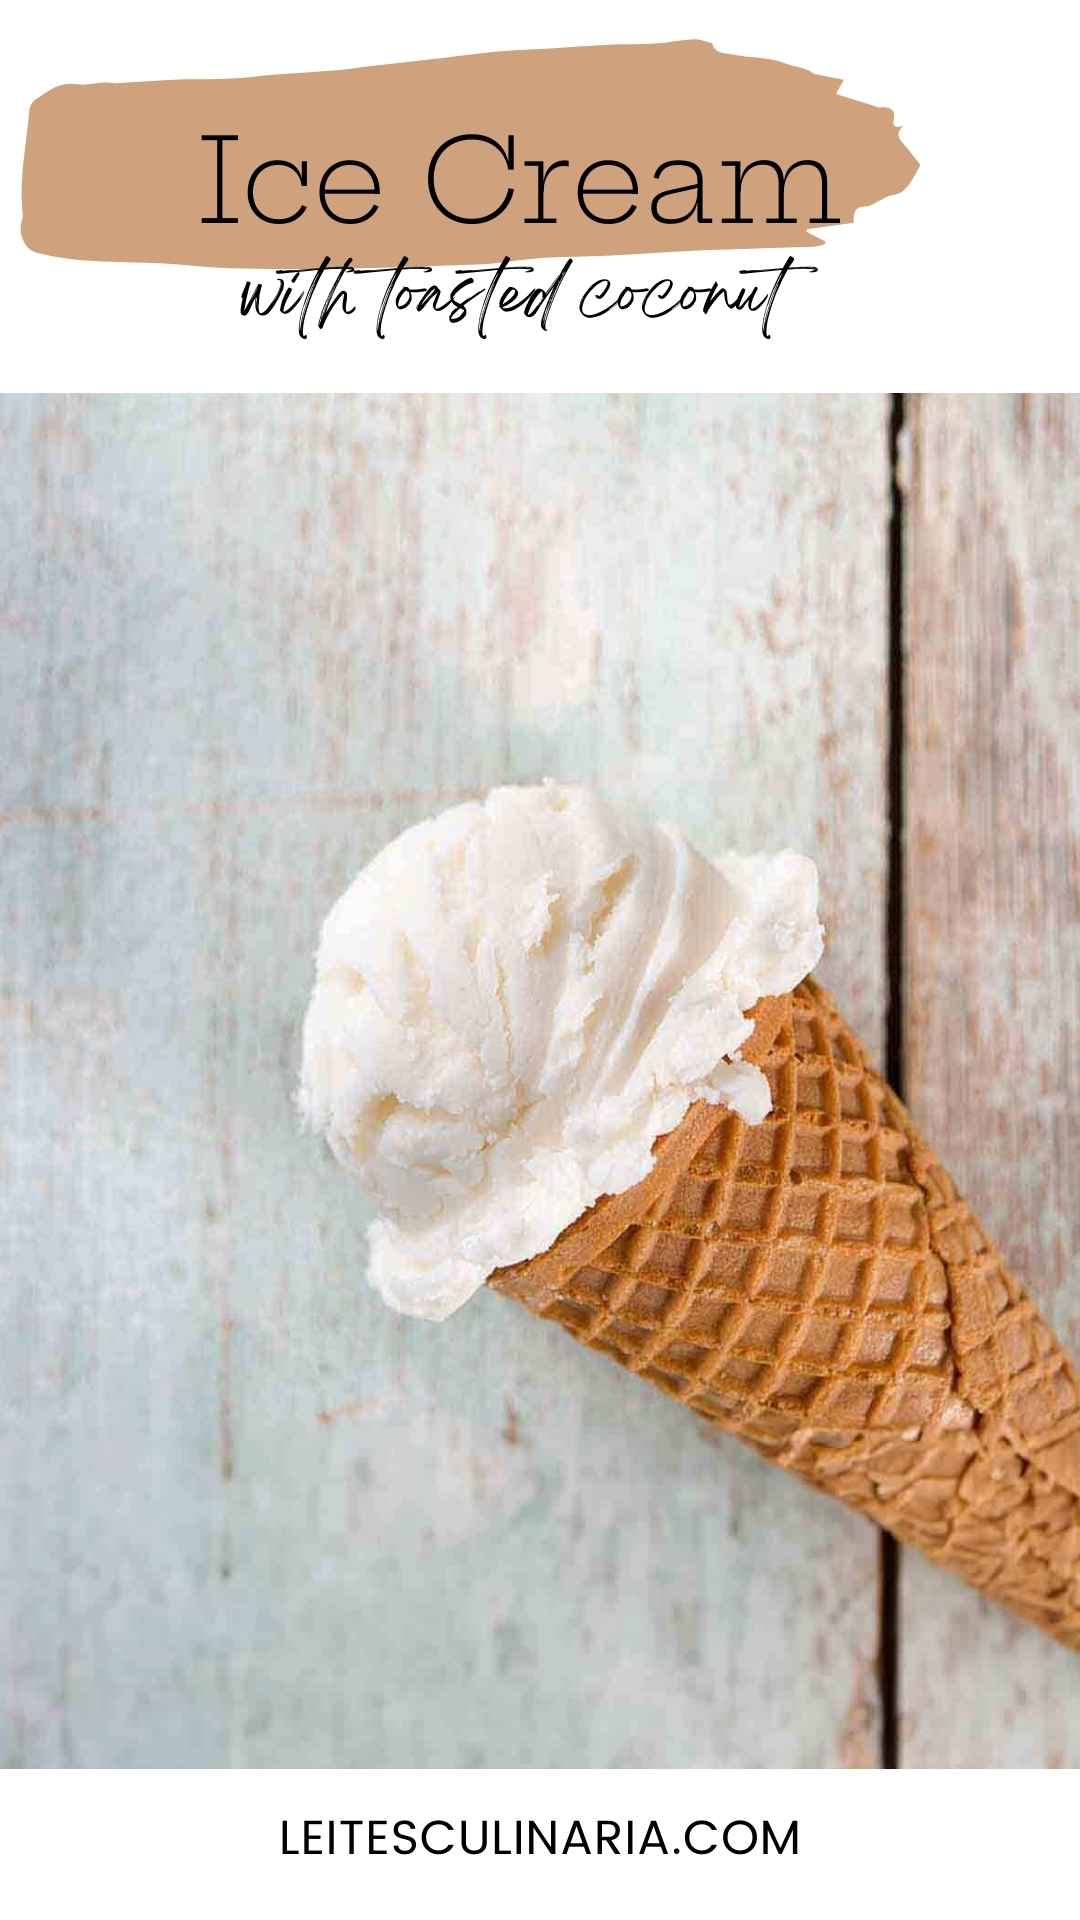 A waffle cone with a scoop of toasted coconut ice cream in it.